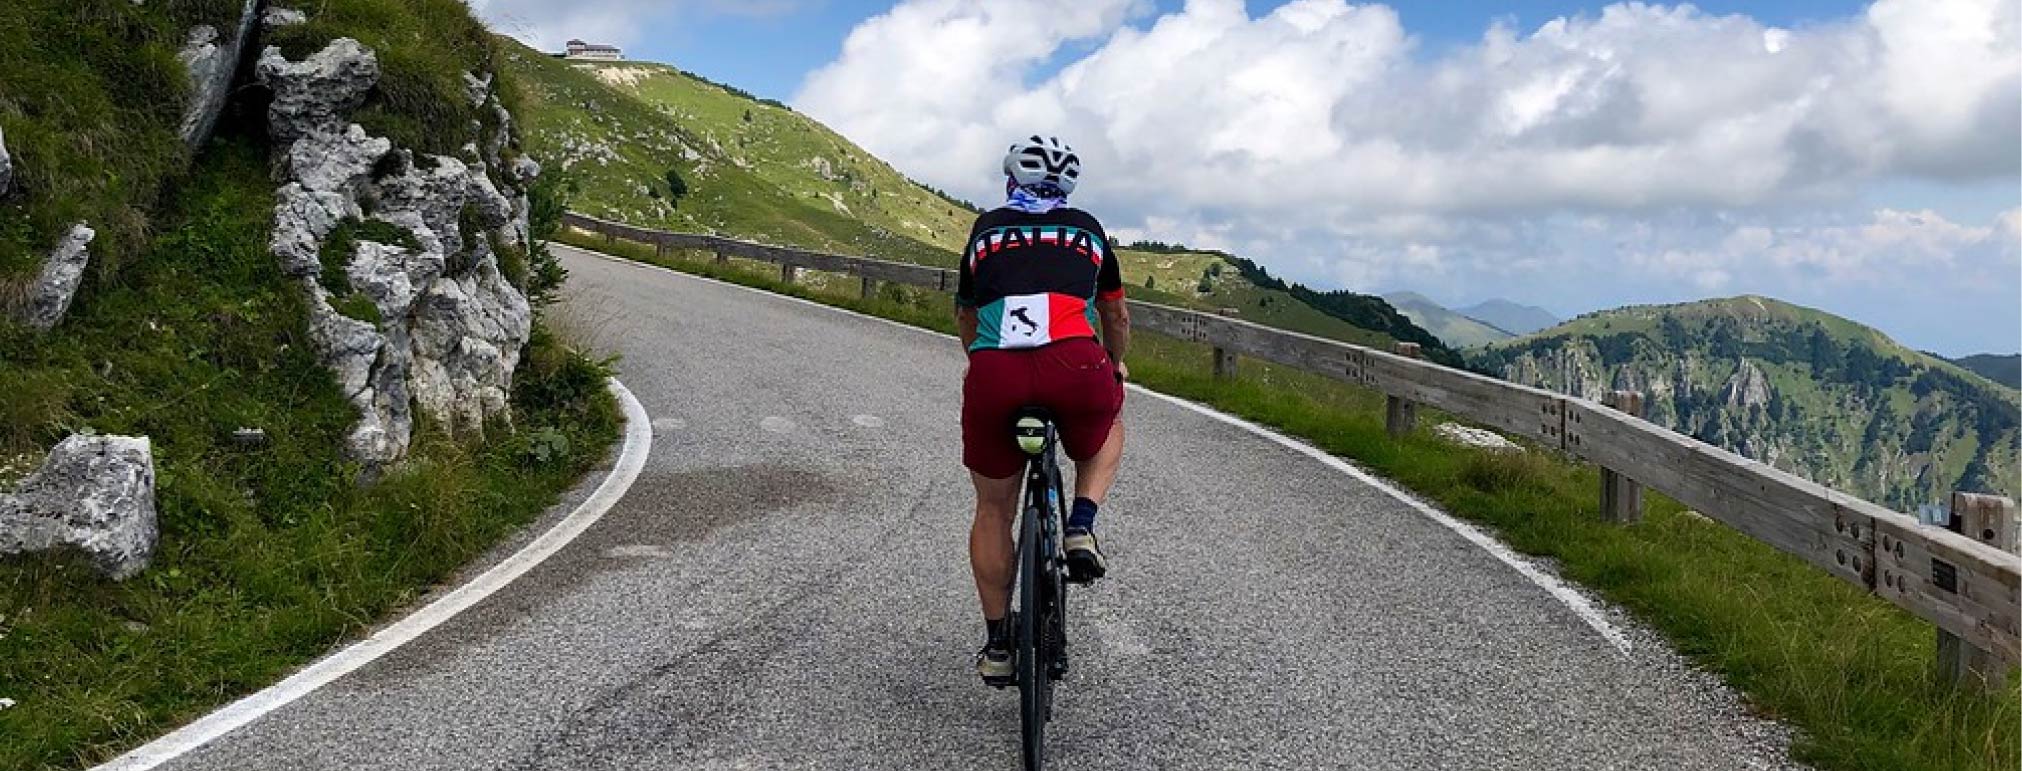 Cyclist in an Italy jersey on a scenic climb.